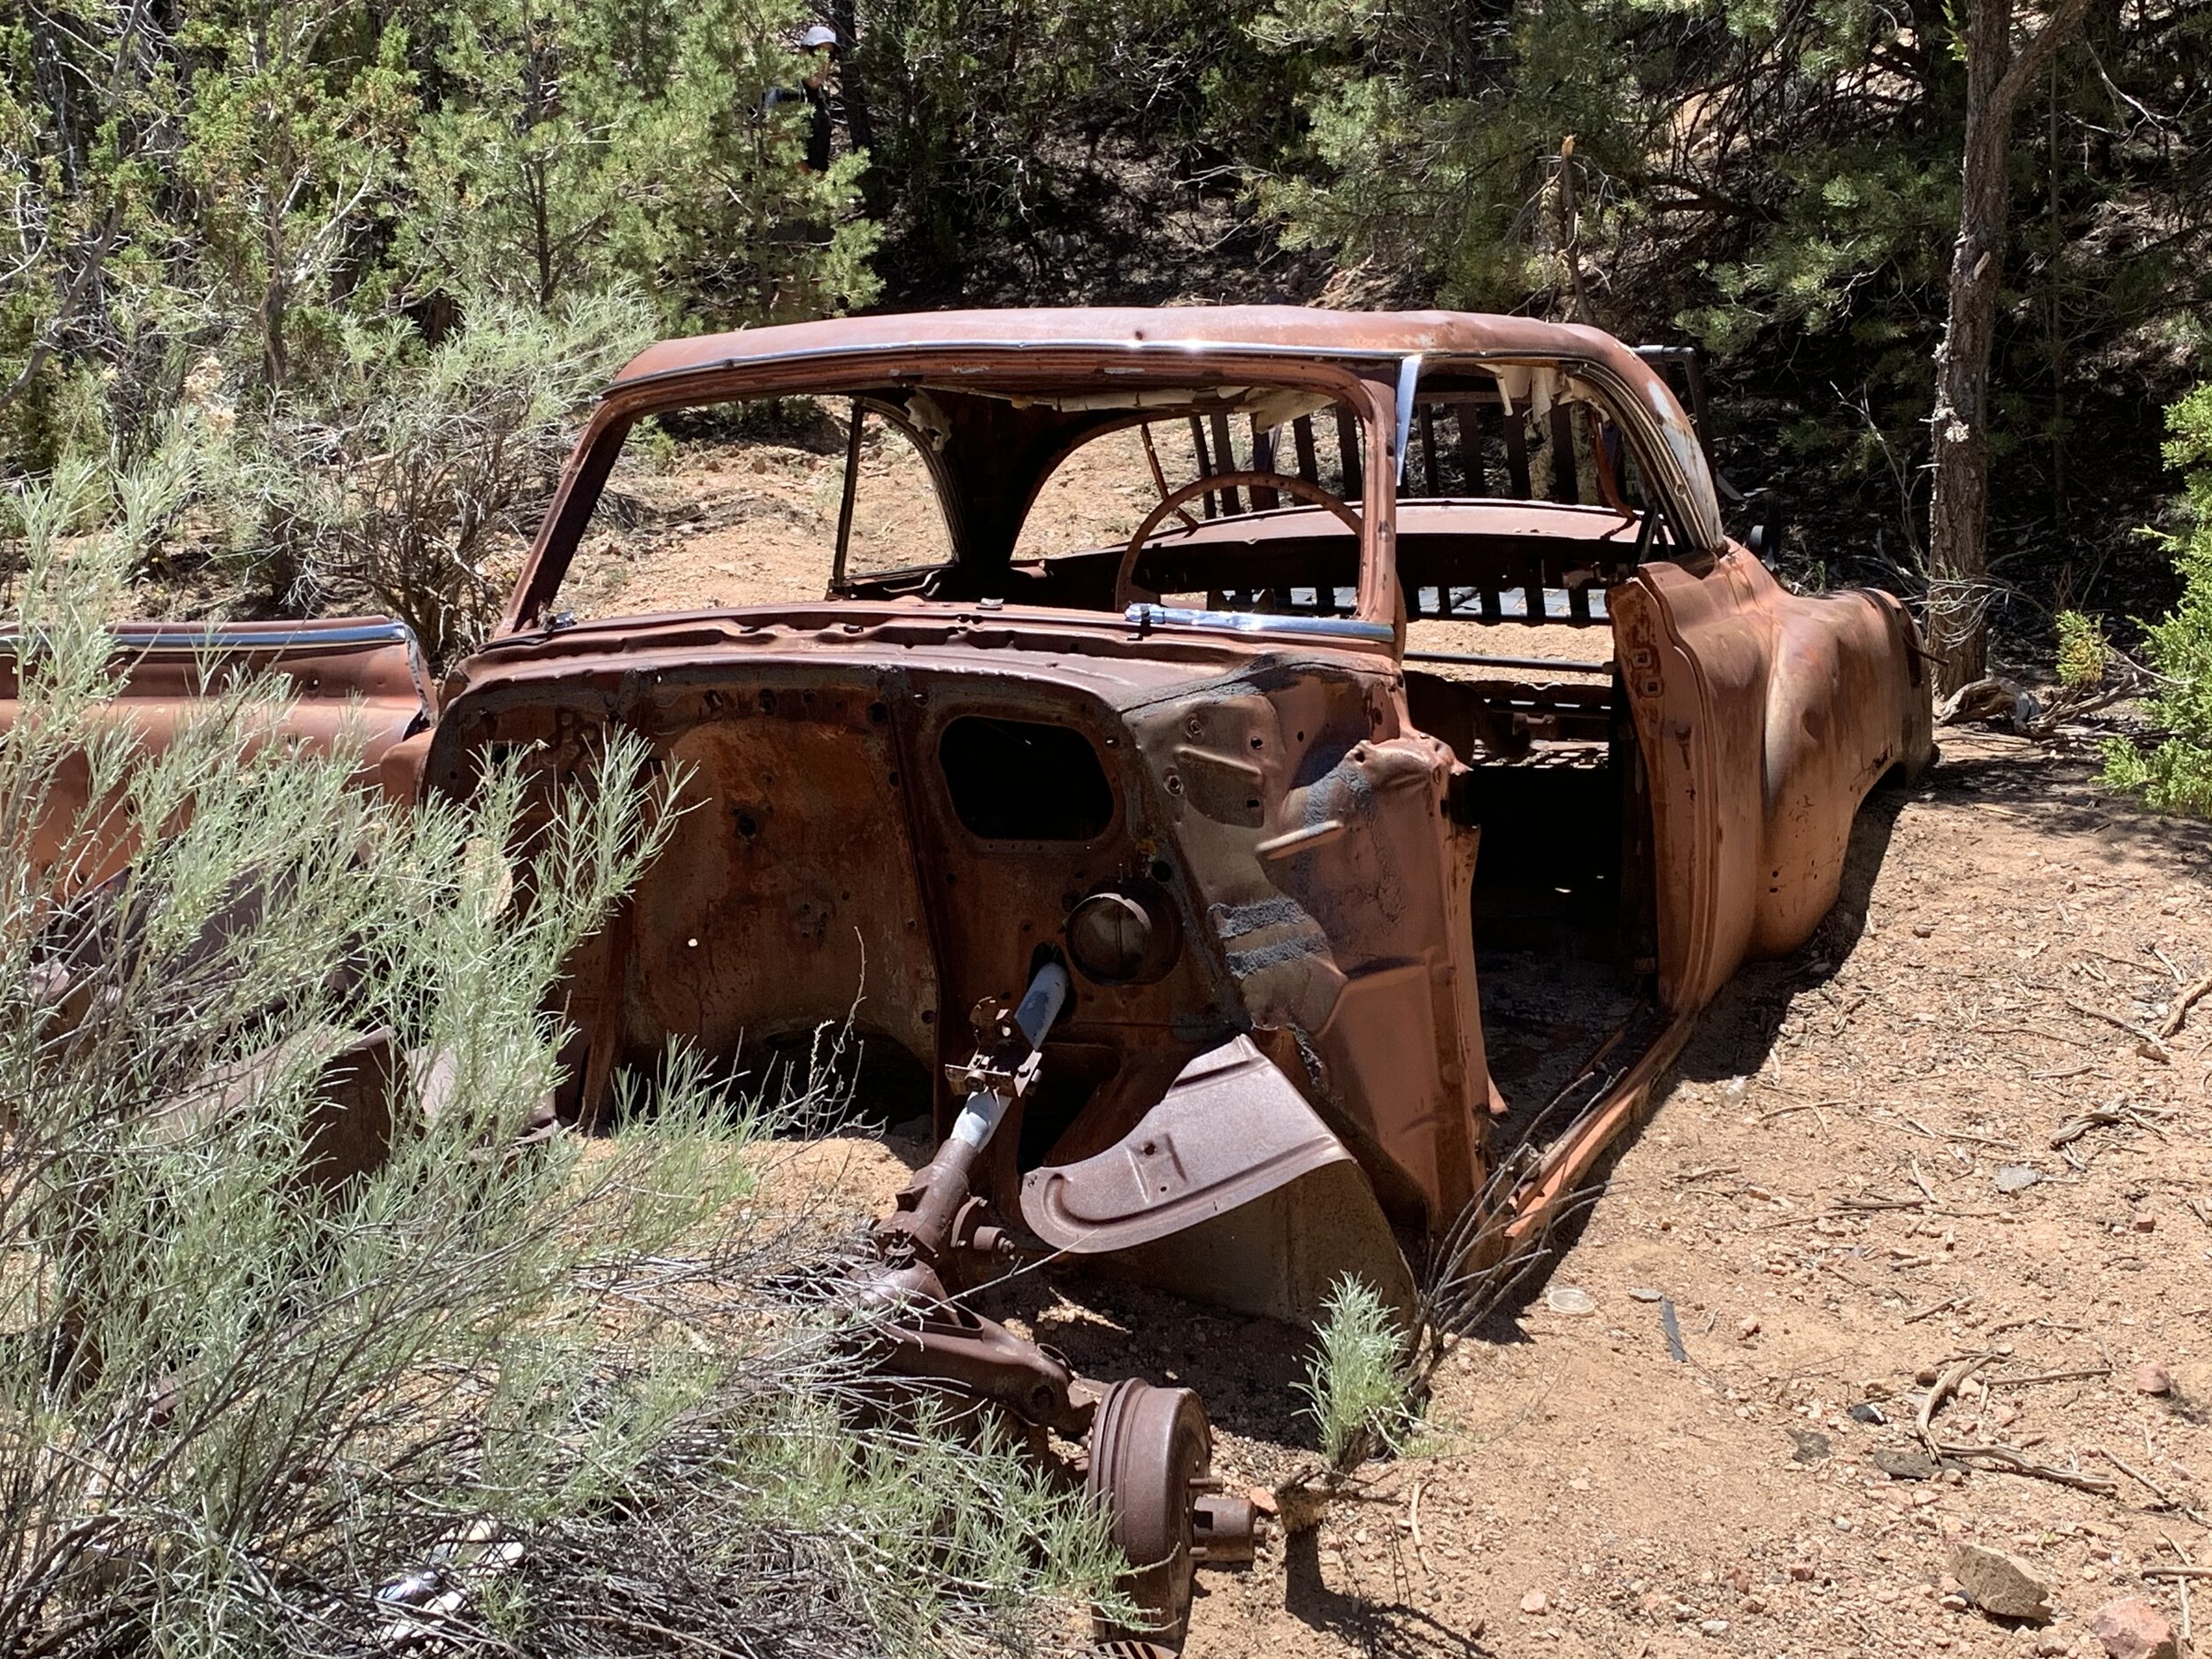  On one hike in Santa Fe, we came upon this car out in a remote area, half-buried in the sand, It made us wonder if it had fallen off a cliff at some point years ago. 😲 